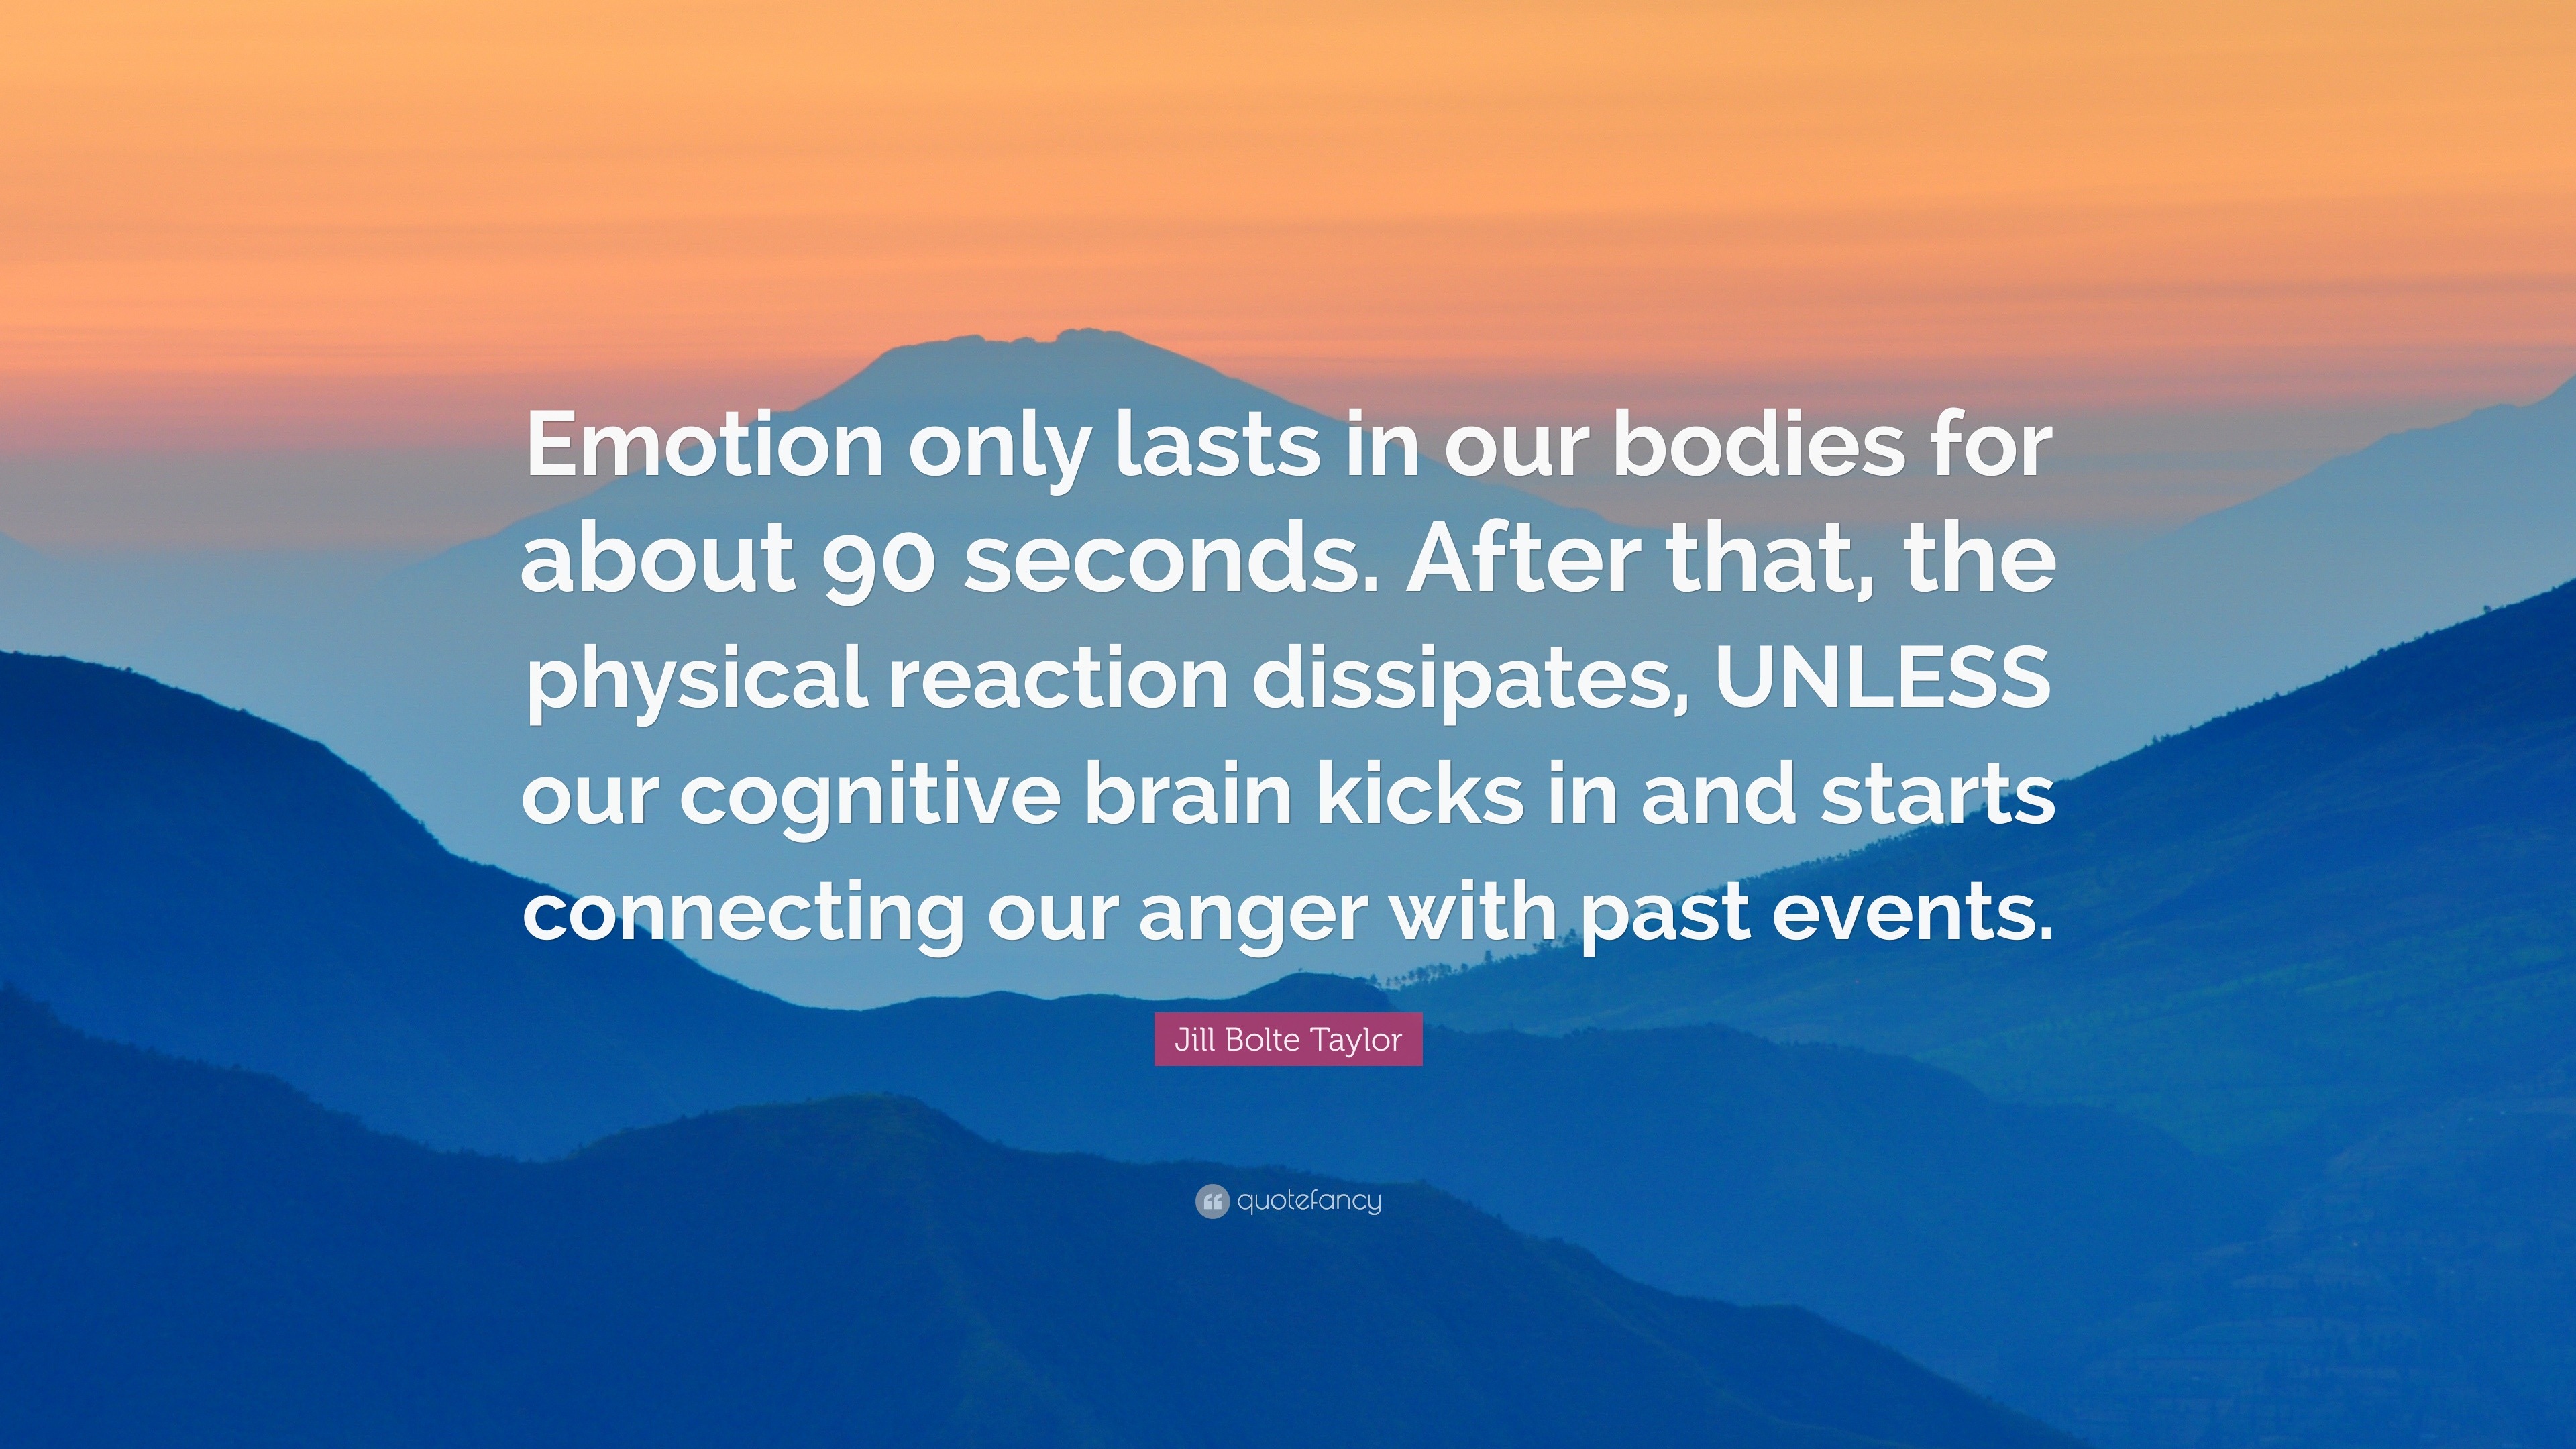 Jill Bolte Taylor Quote: “Emotion only lasts in our bodies for